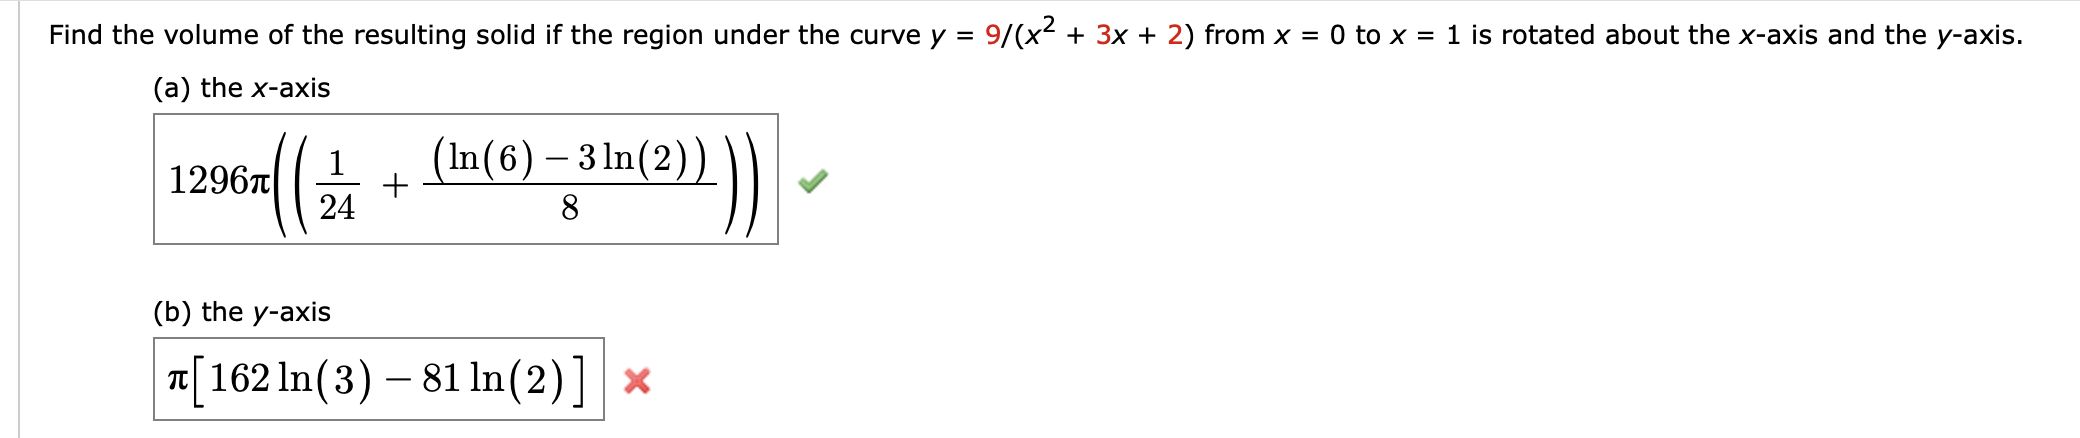 Find the volume of the resulting solid if the region under the curve y =
9/(x2 + 3x + 2) from x = 0 to x = 1 is rotated about the x-axis and the y-axis.
(a) the x-axis
(In(6) – 3 ln(2)
1296T
24
(b) the y-axis
¤[162 In(3) – 81 ln(2)] ×
